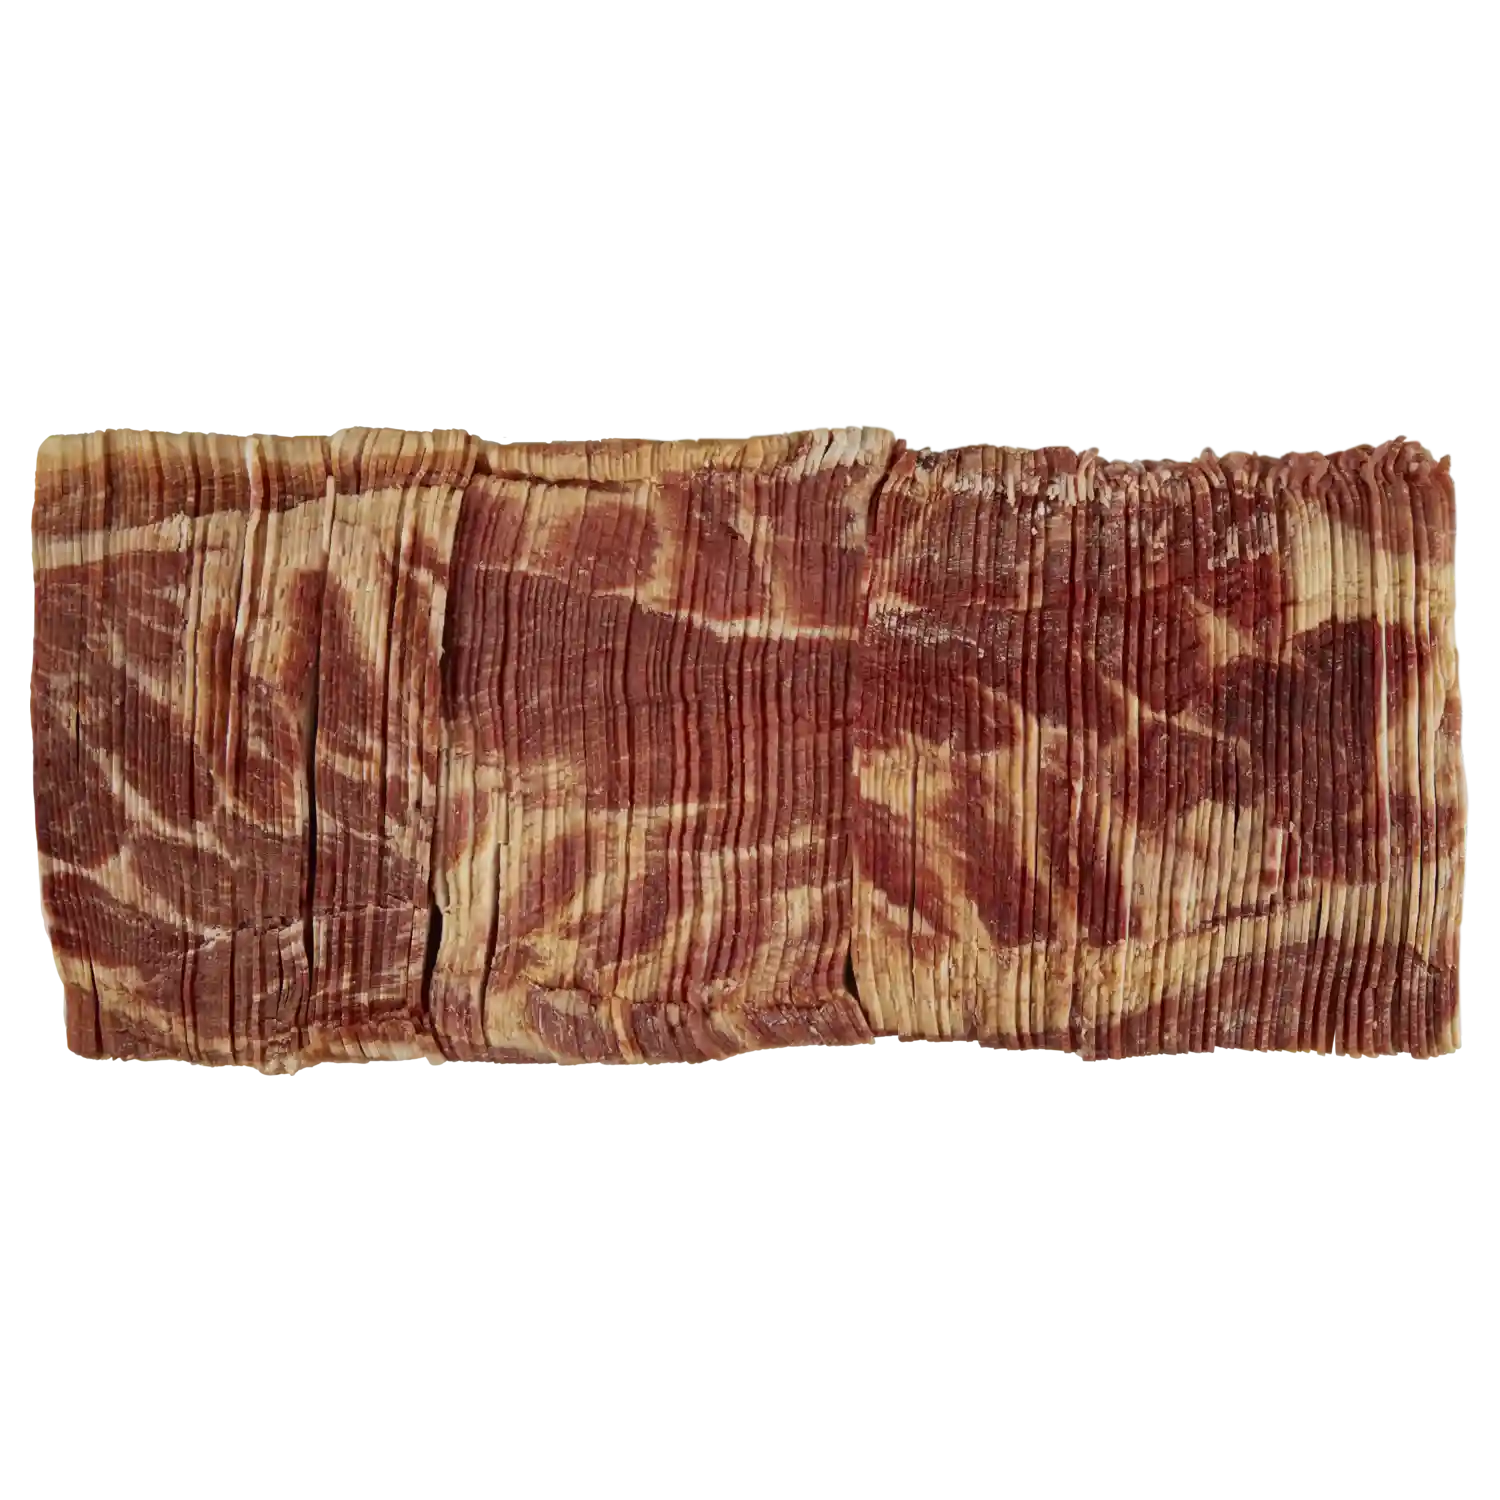 Wright® Brand Naturally Hickory Smoked Thick Sliced Bacon, Bulk, 30 Lbs, 5 Slices/Inch, Frozen_image_31